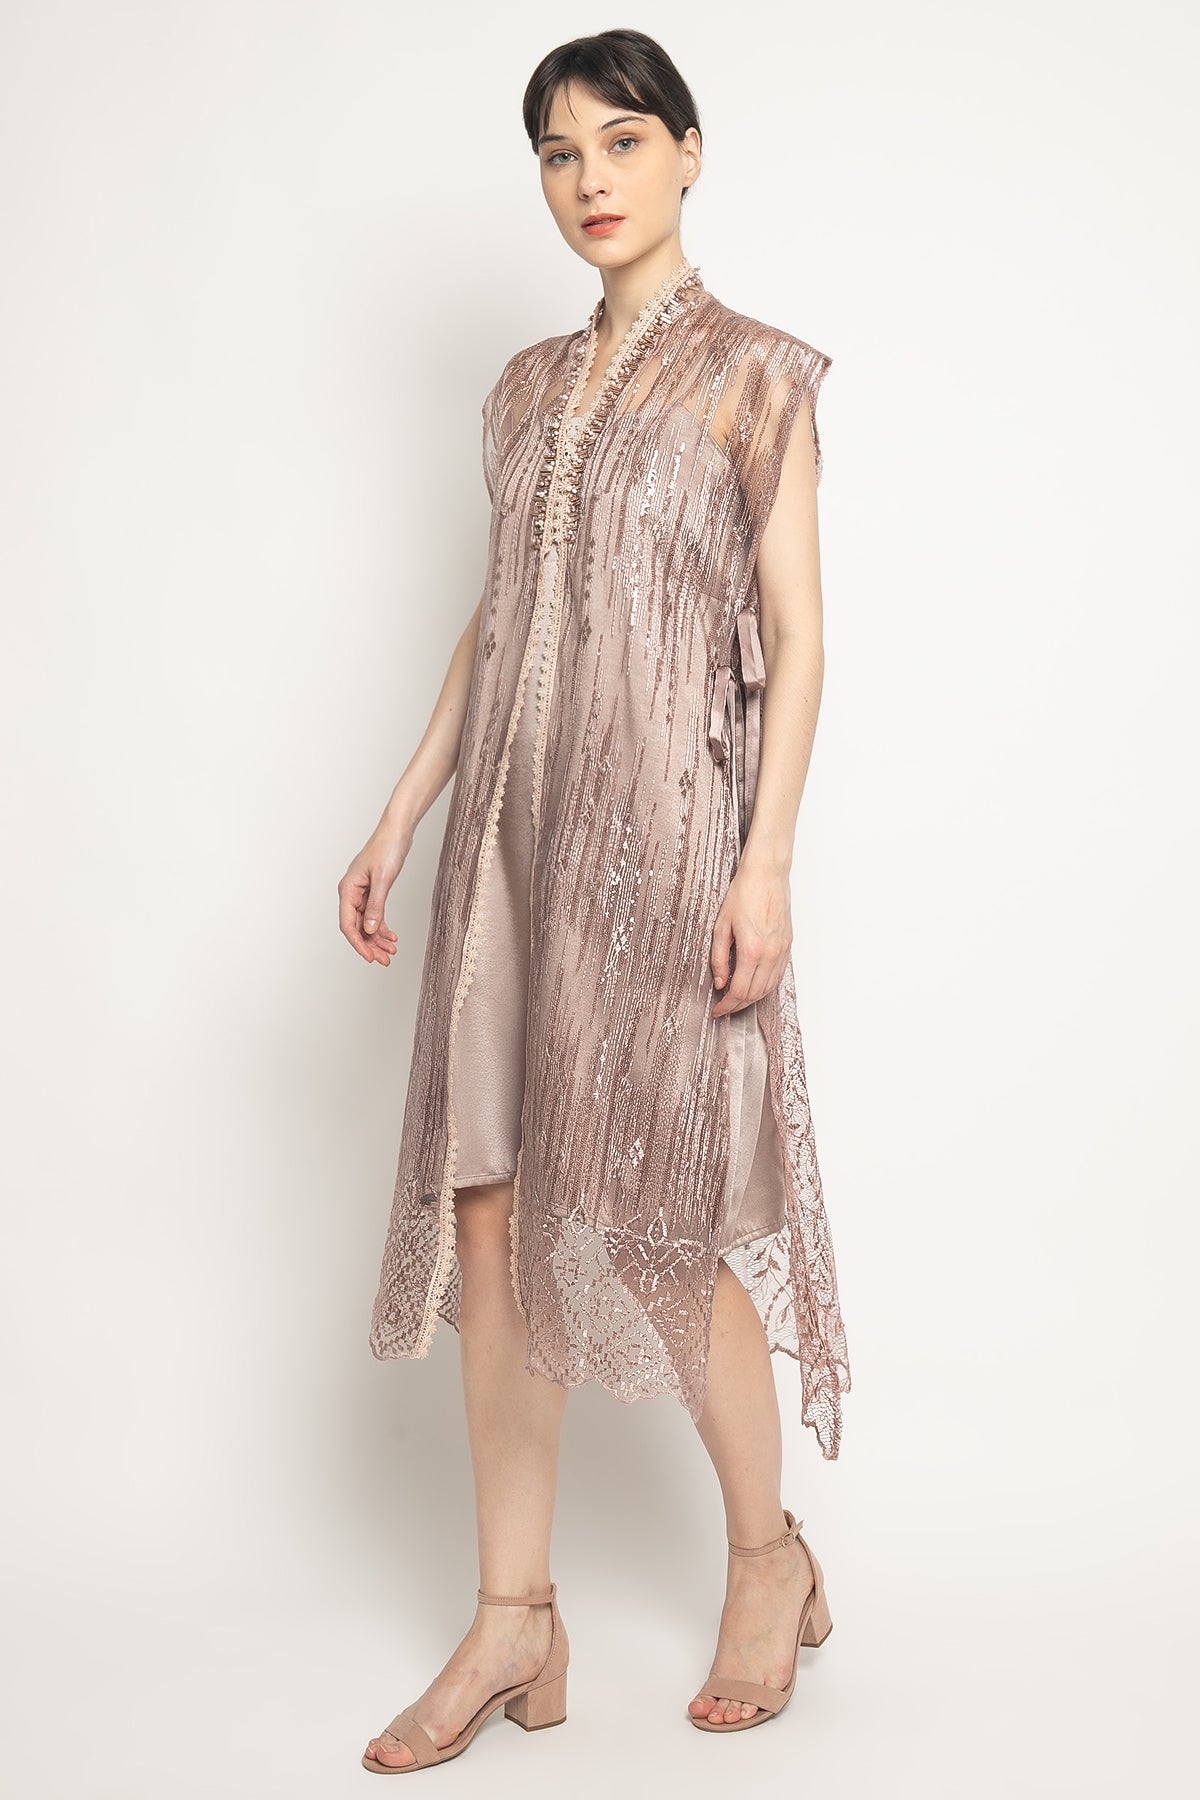 Lyca Outer Dress in Rose Gold